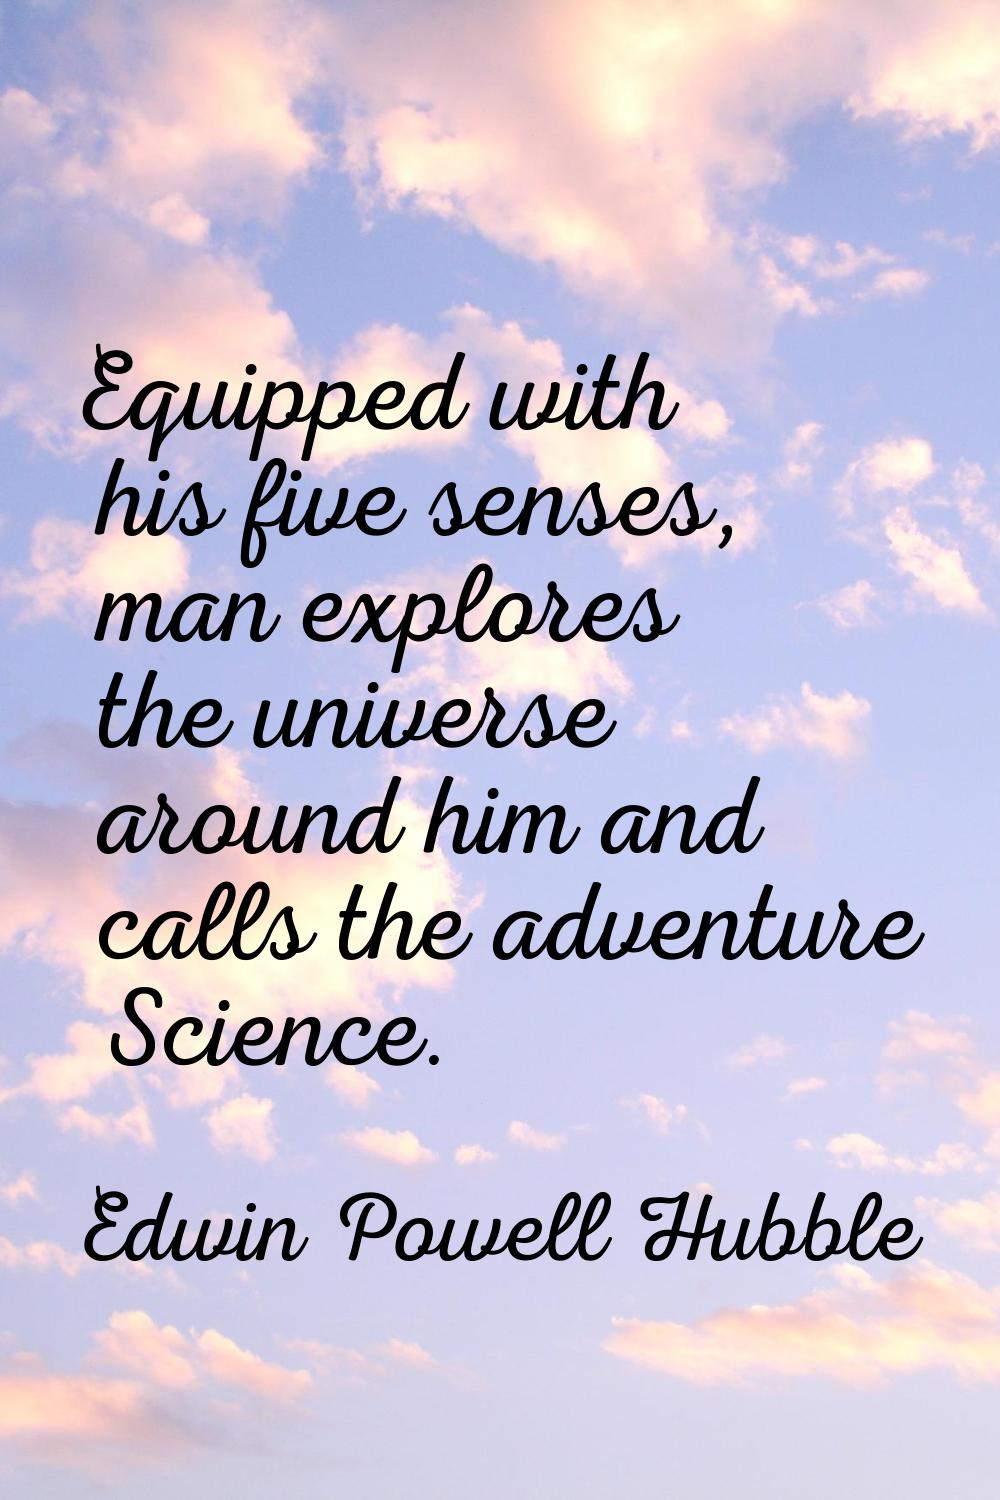 Equipped with his five senses, man explores the universe around him and calls the adventure Science